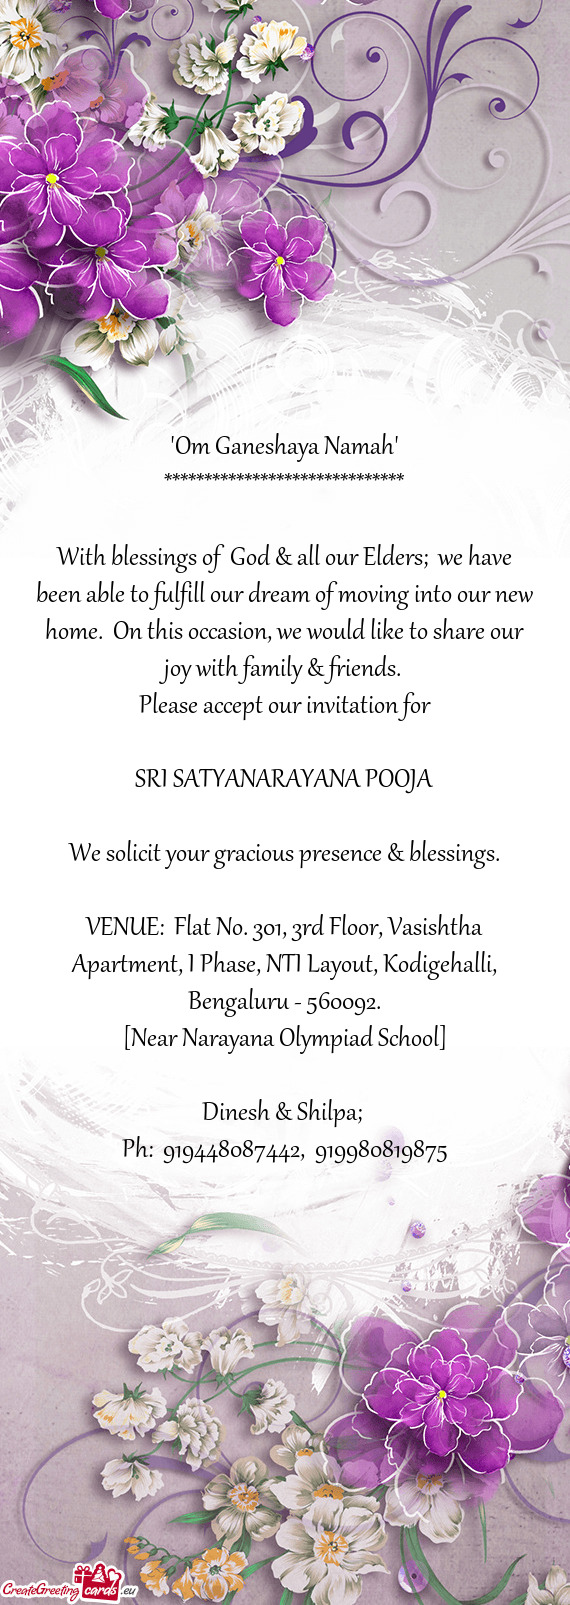 With blessings of God & all our Elders; we have been able to fulfill our dream of moving into our